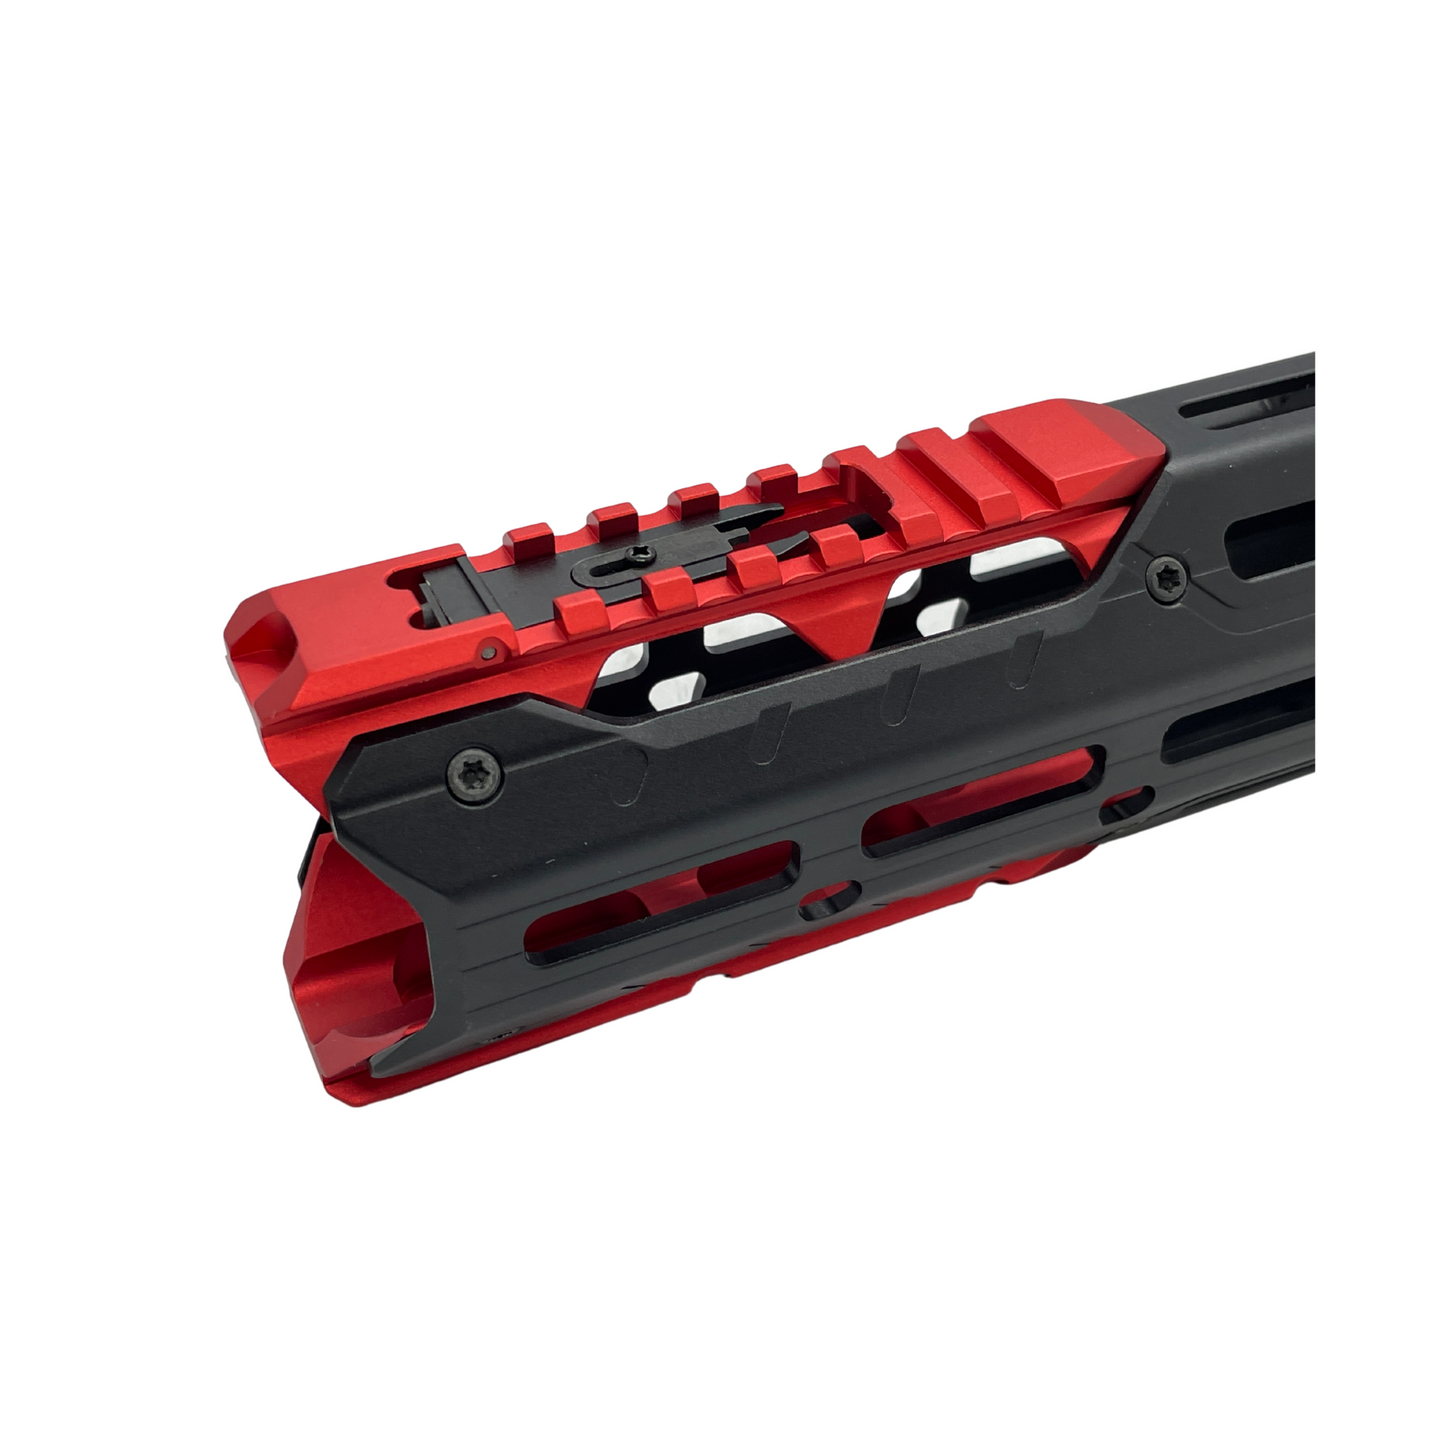 Genuine Strike Industries "GRIDLOCK" Hand-guard With Integrated Front Sight